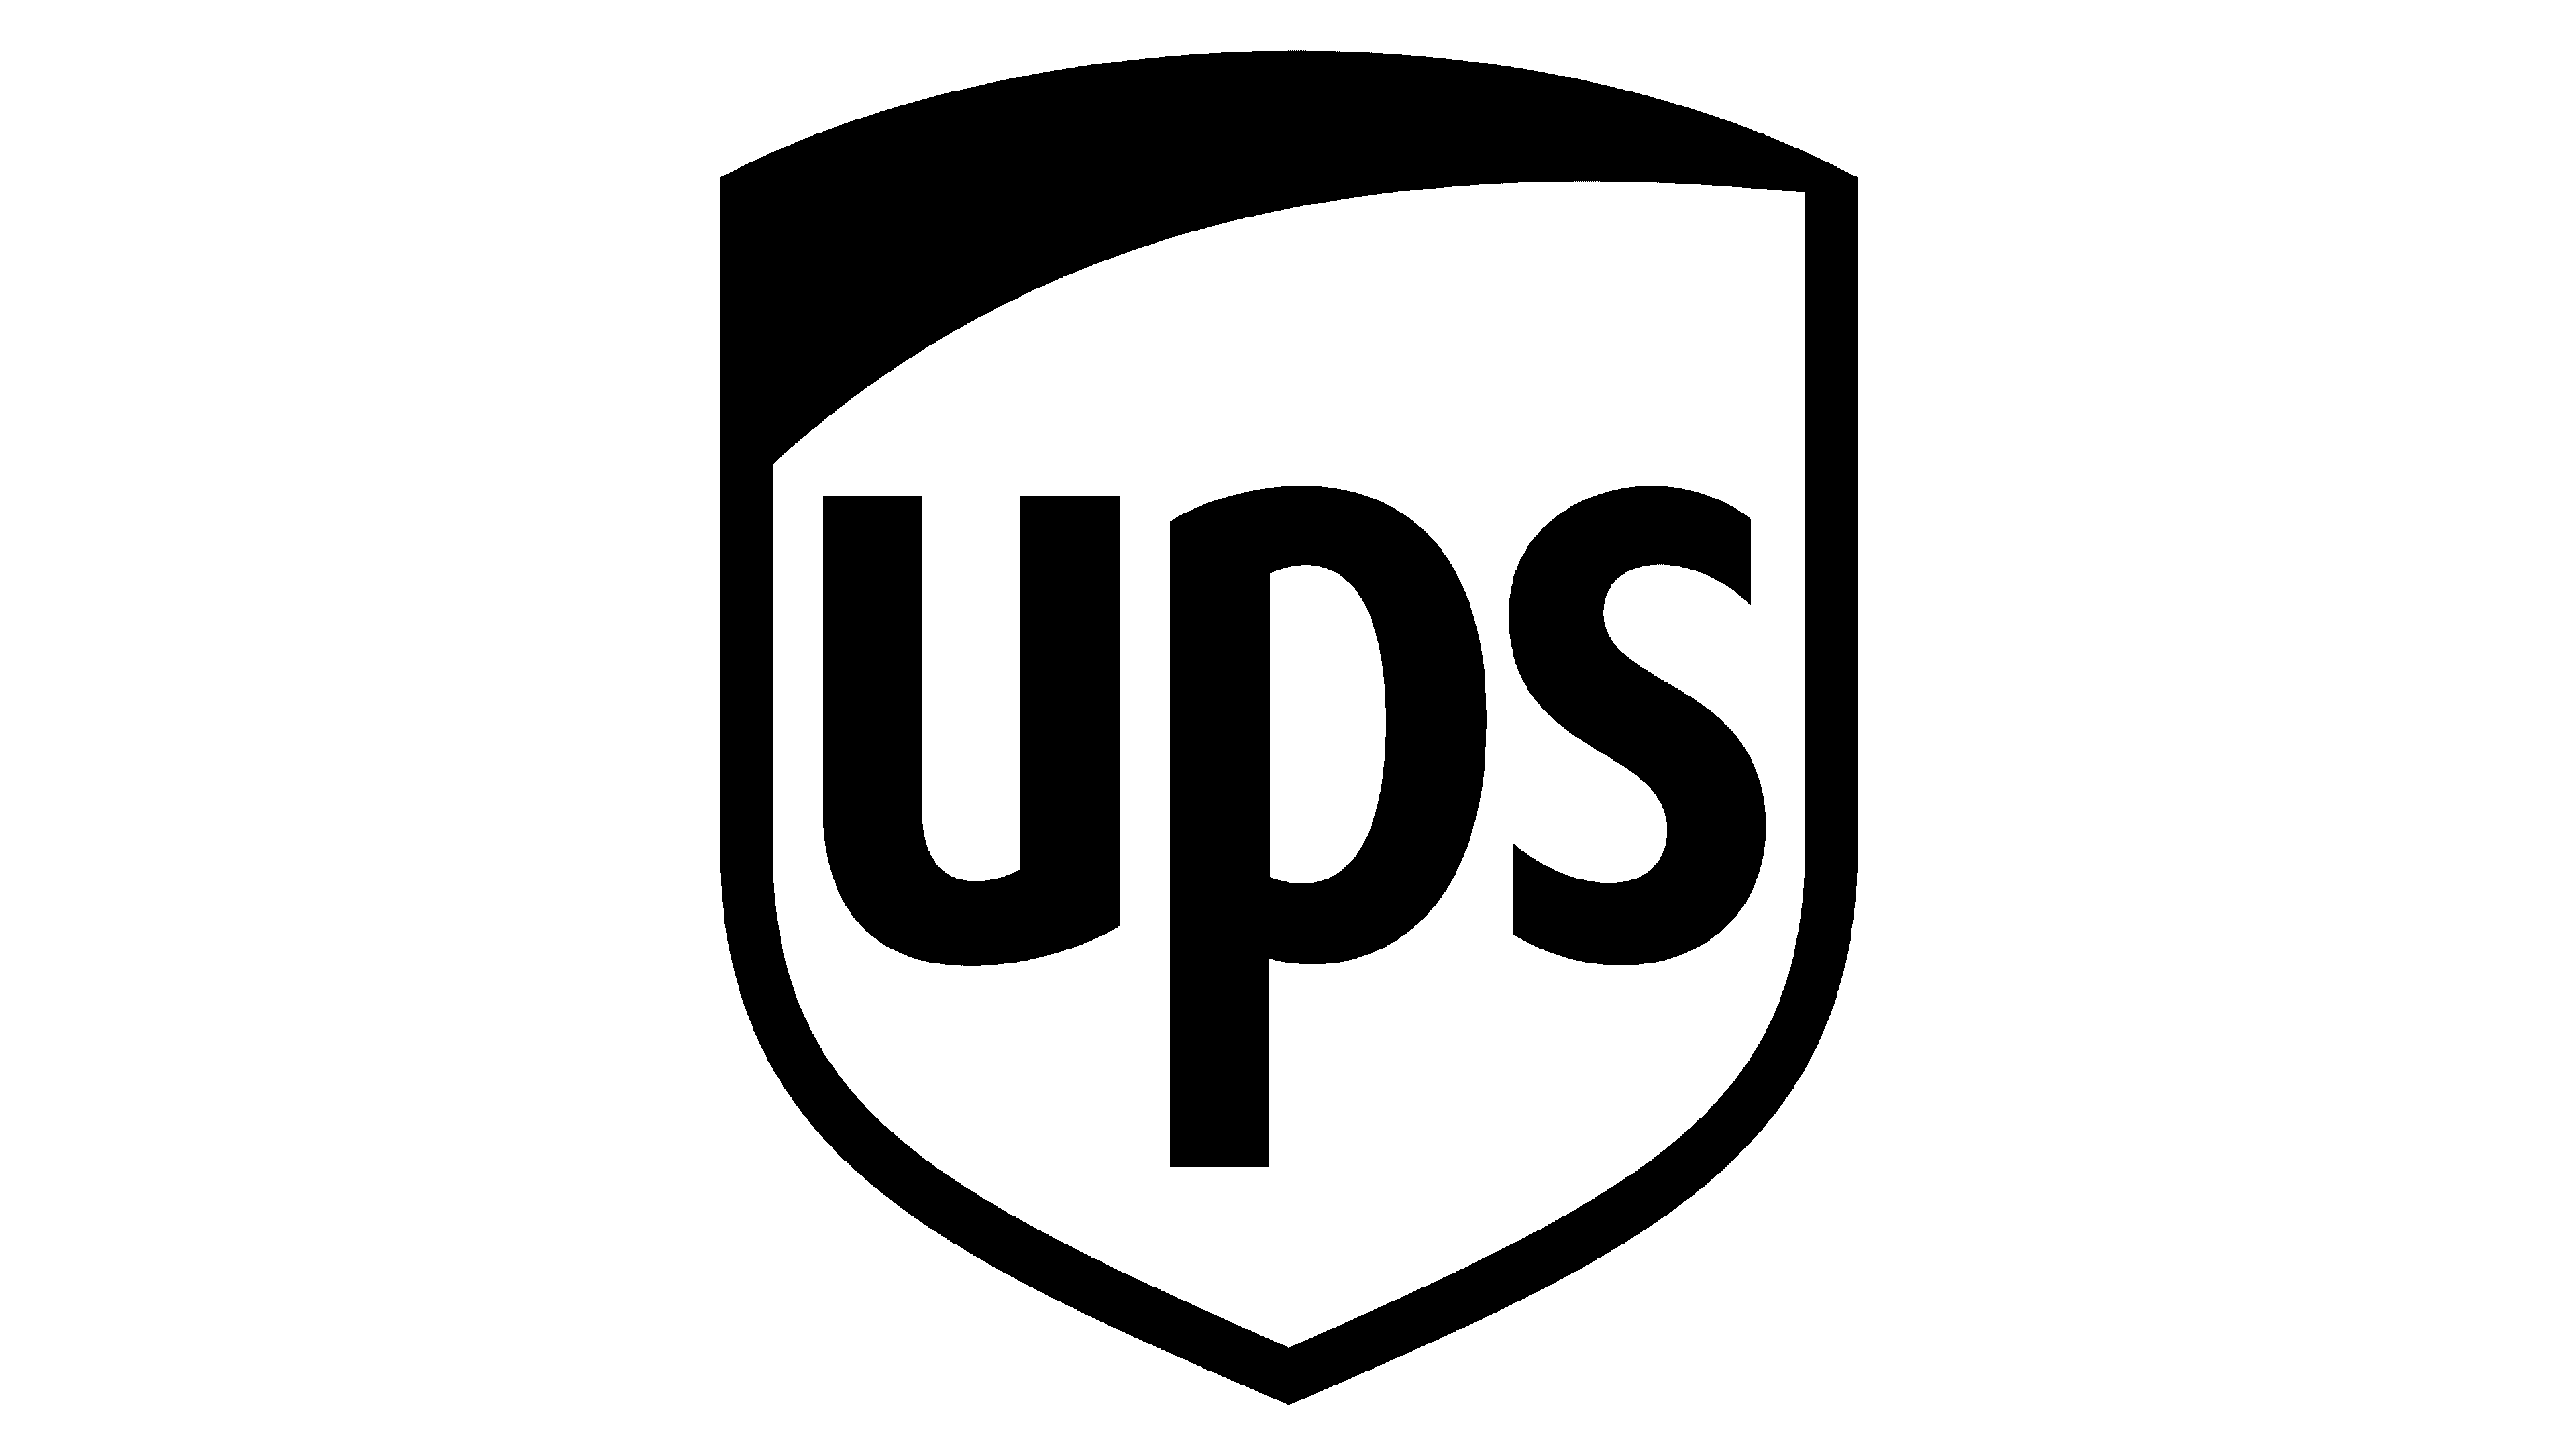 UPS Logo and sign, new logo meaning and history, PNG, SVG